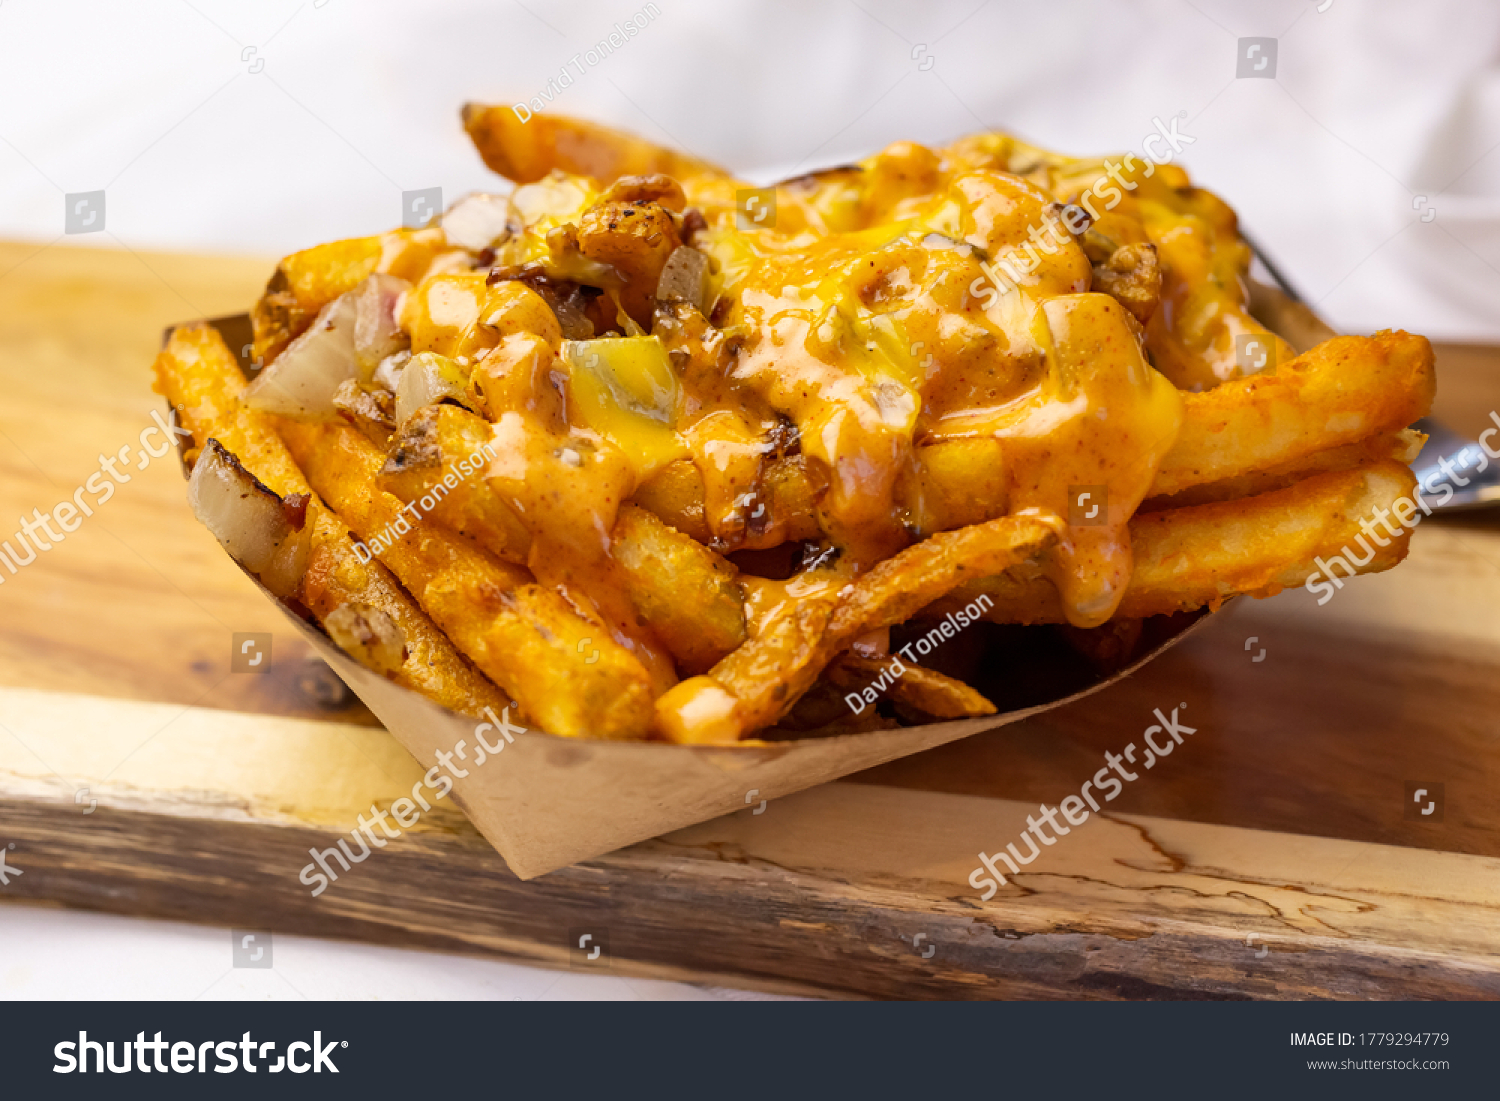 A view of a basket of loaded fries, on a wooden cutting board. #1779294779